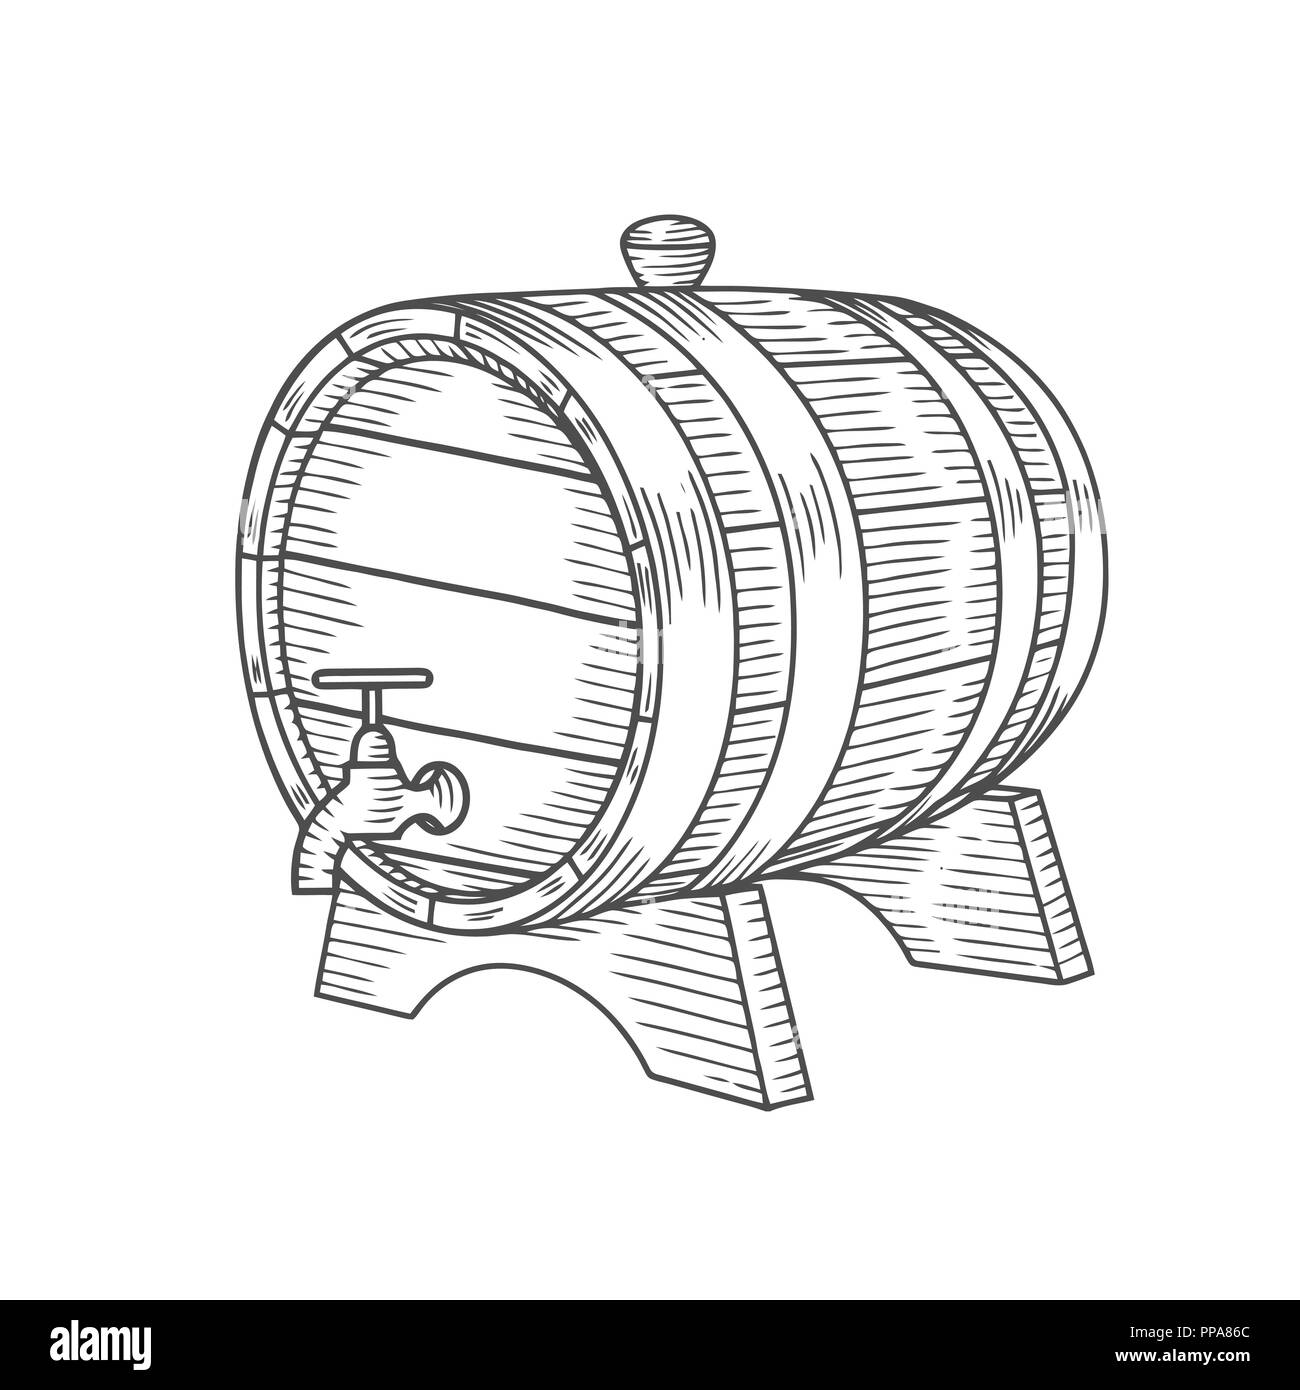 Hand drawn barrel illustration in engraving style. Vintage whiskey, wine or beer barrel isolated on white background. Stock Vector